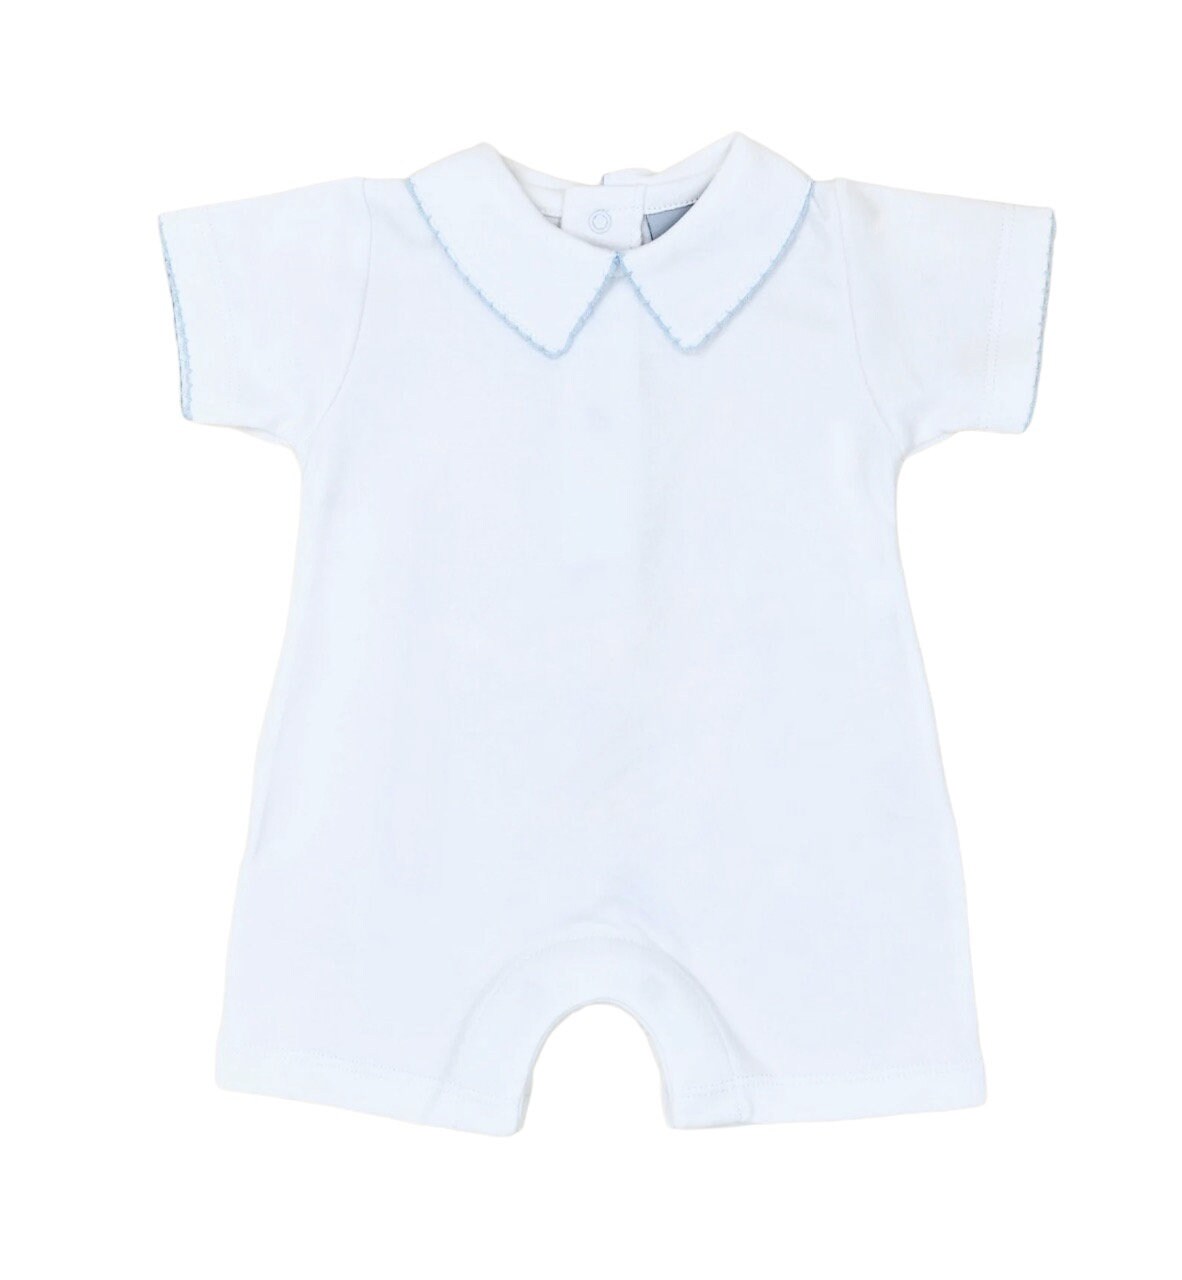 Andrew White With Blue Trim Baptism Outfit-baby - Etsy